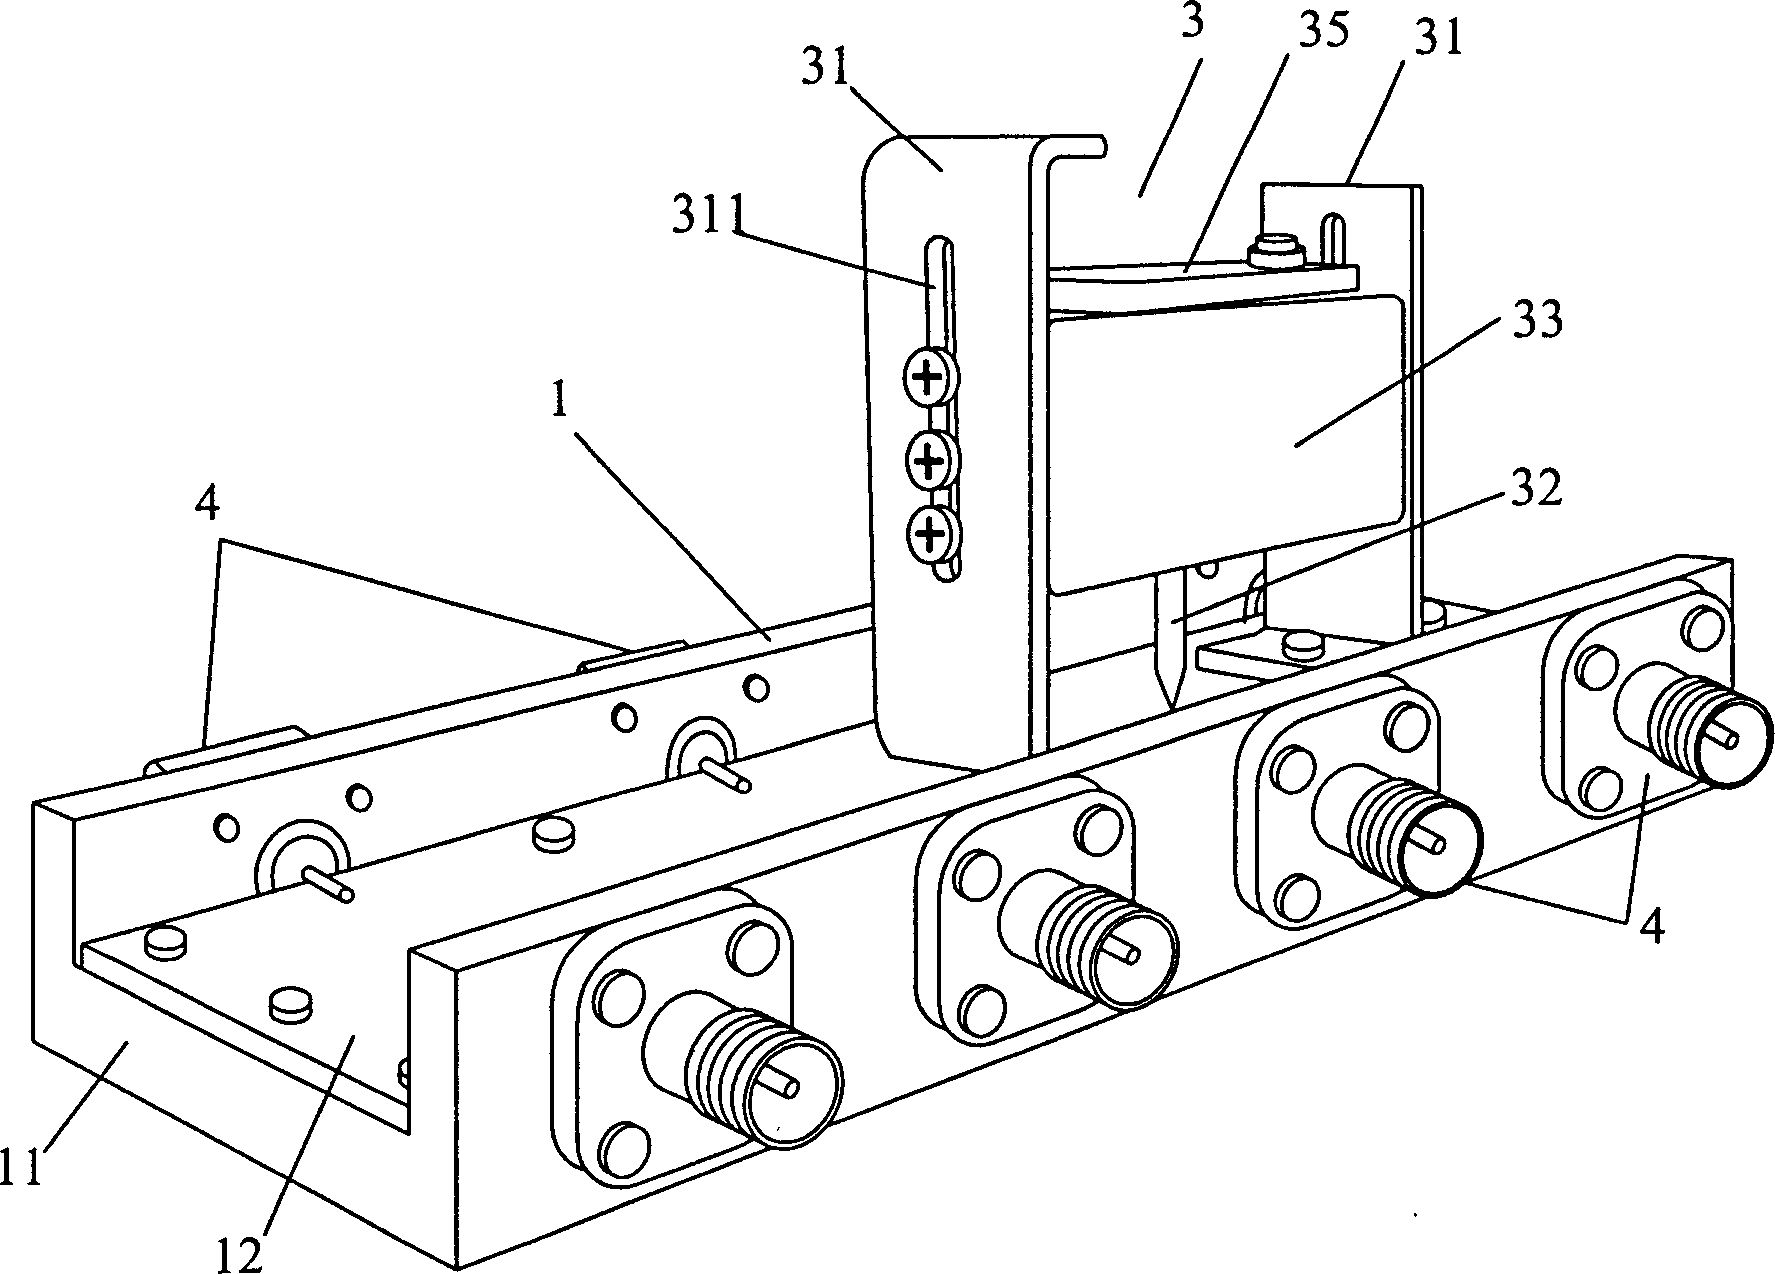 Microwave ceramic element detection clamp and device, and detection method thereof